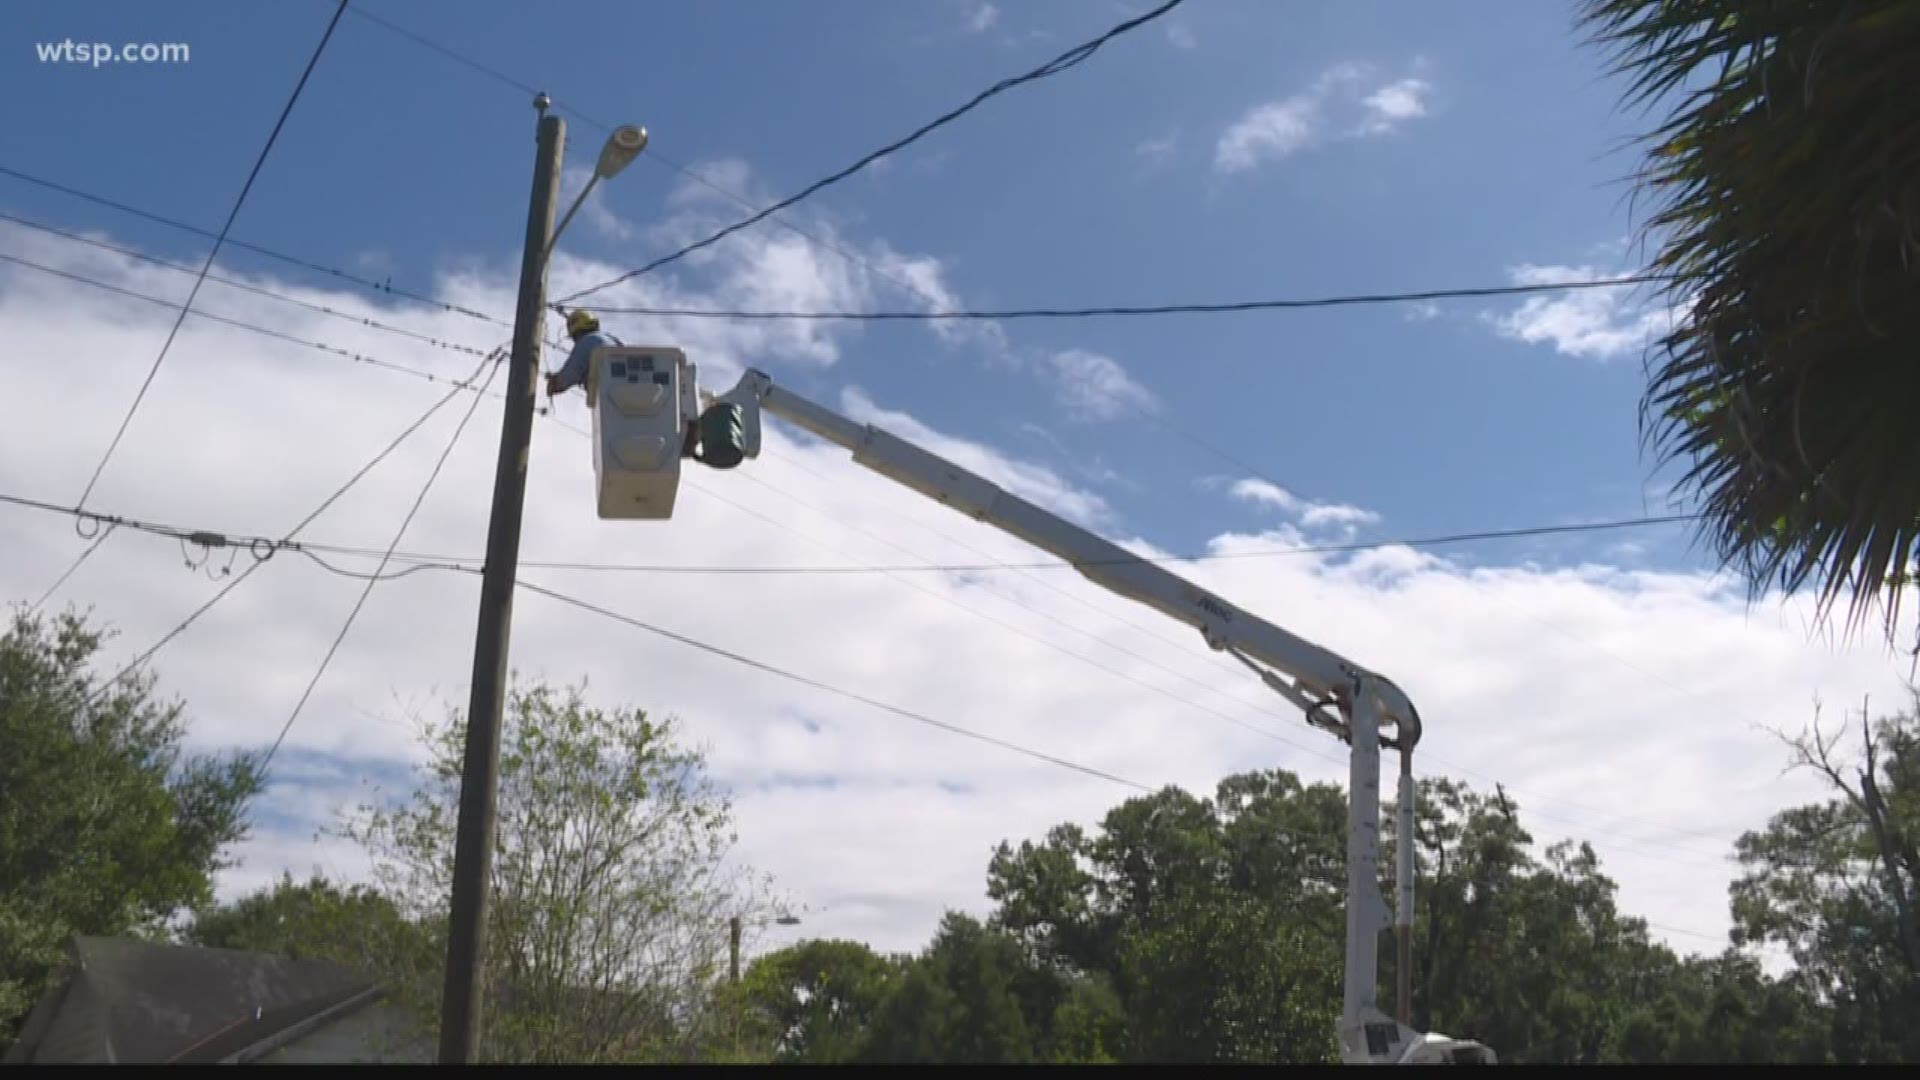 The companies are under pressure to get ready for storms to avoid a repeat of the outages after Hurricane Irma.